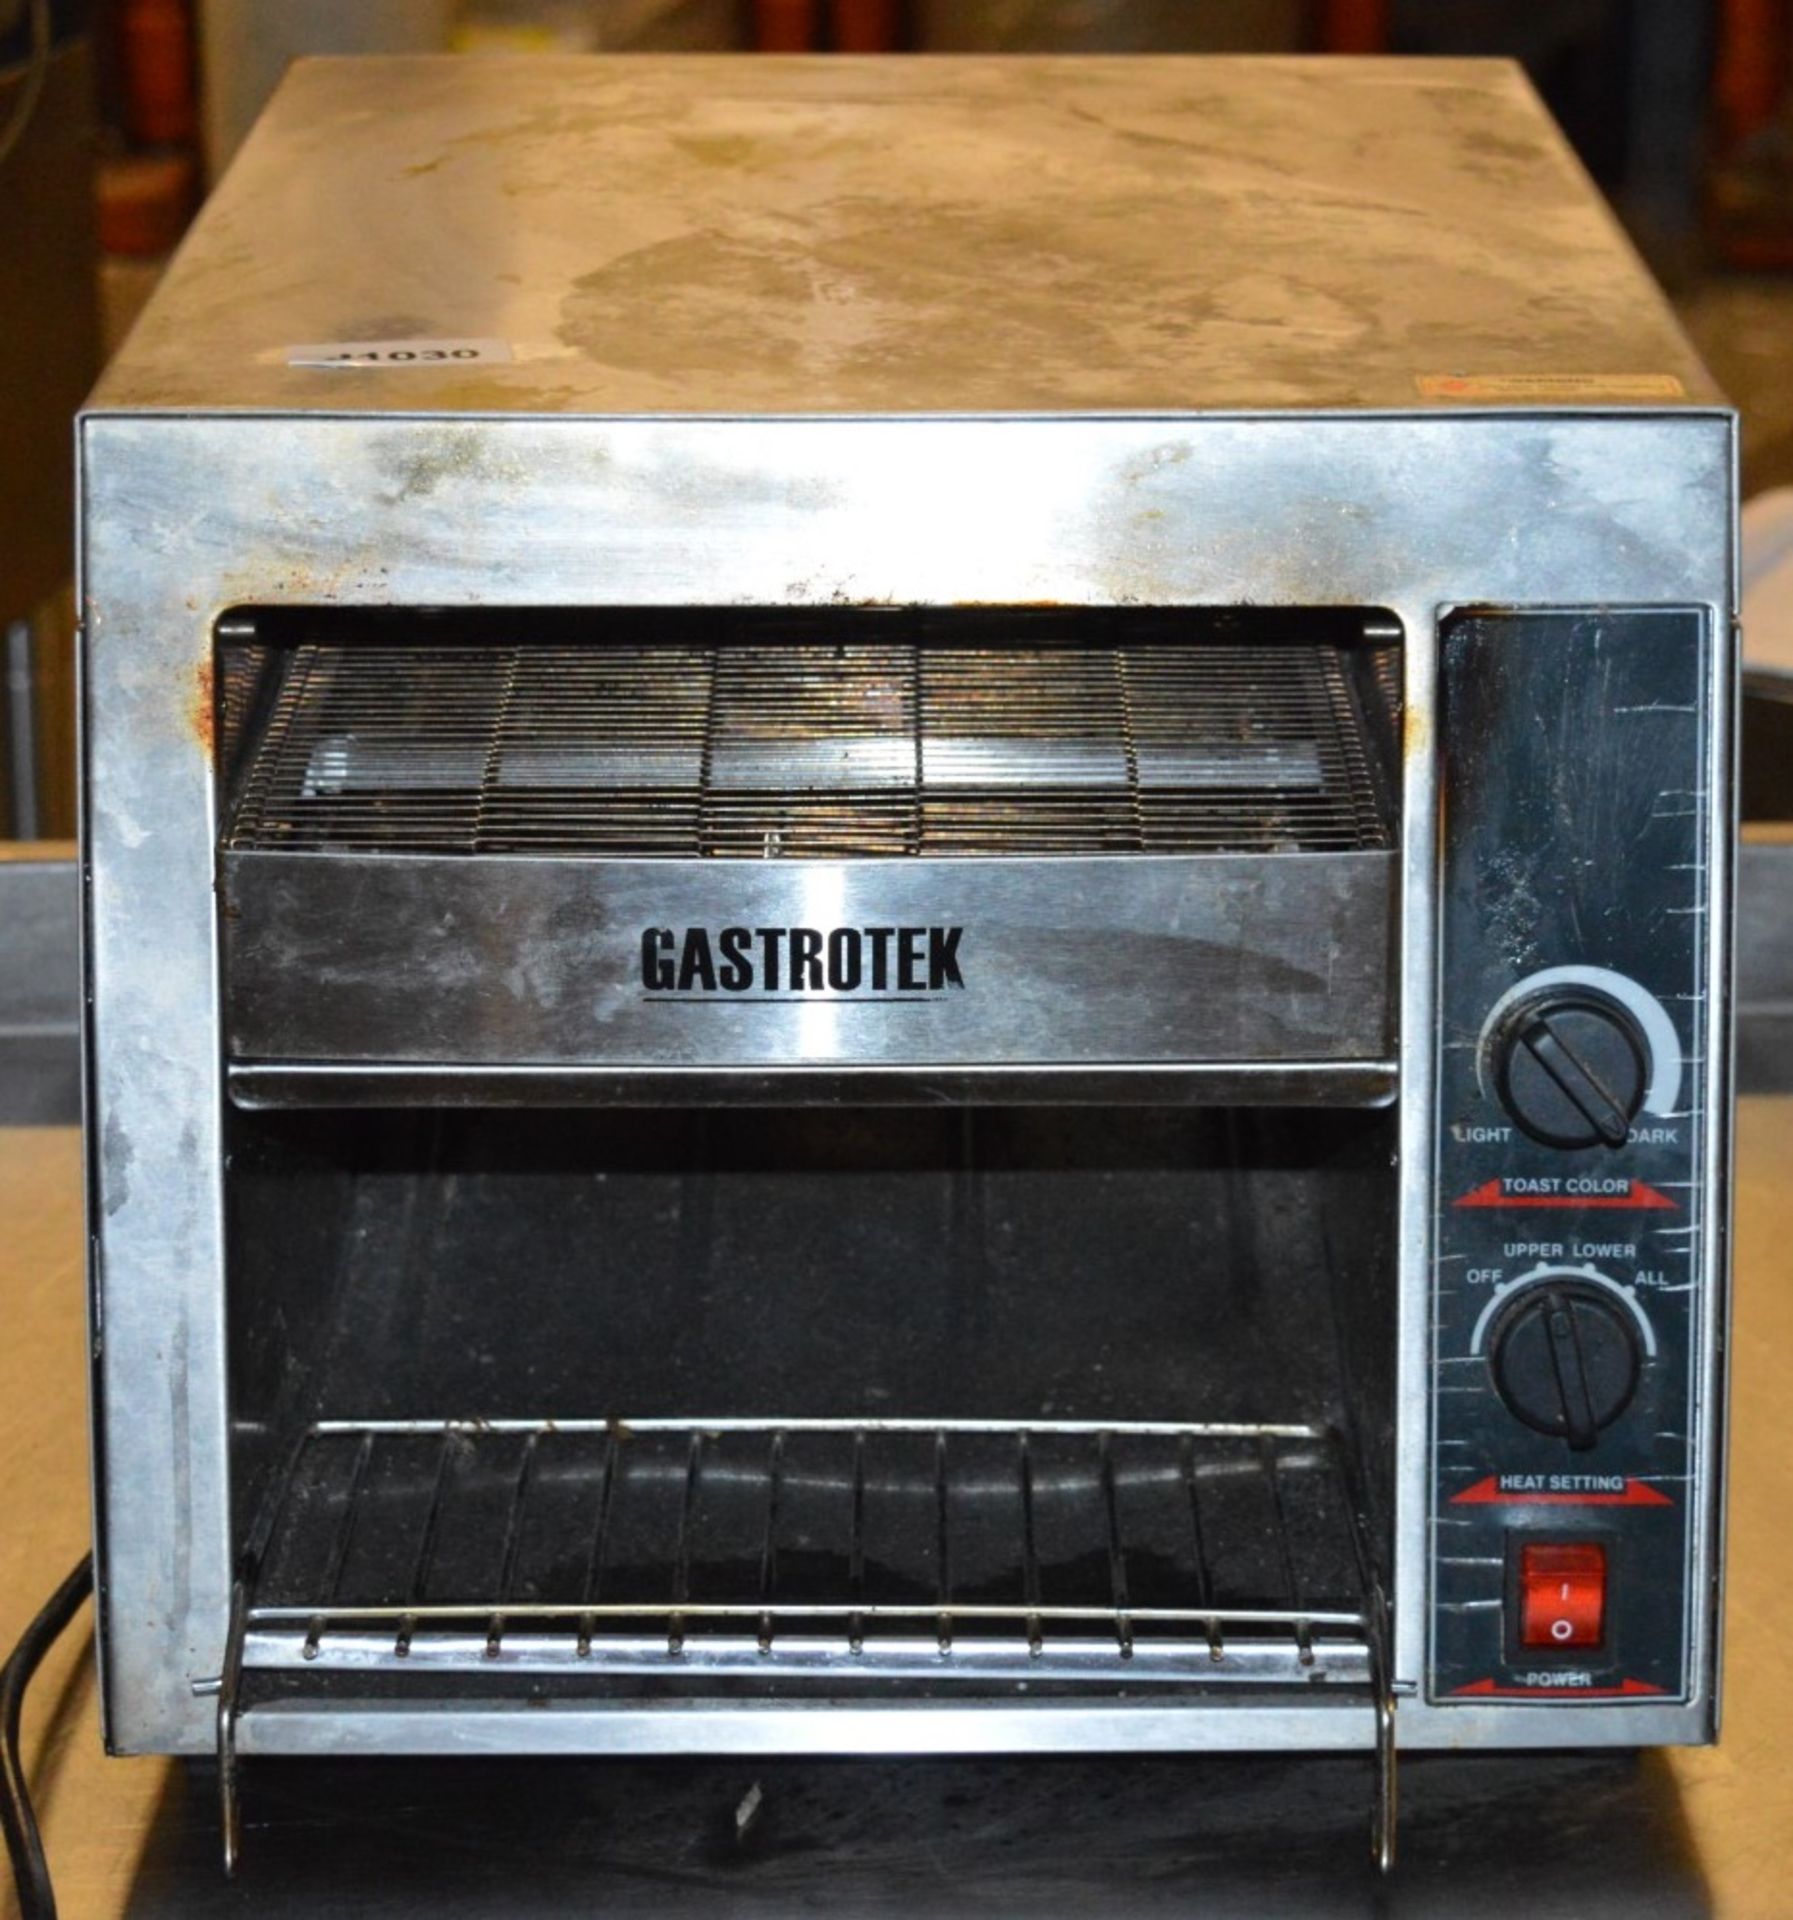 1 x Gastrotek Stainless Steel Counter Top Conveyor Toaster - H31 x W36 x D48 cms - CL124 - Ref J1030 - Image 3 of 4